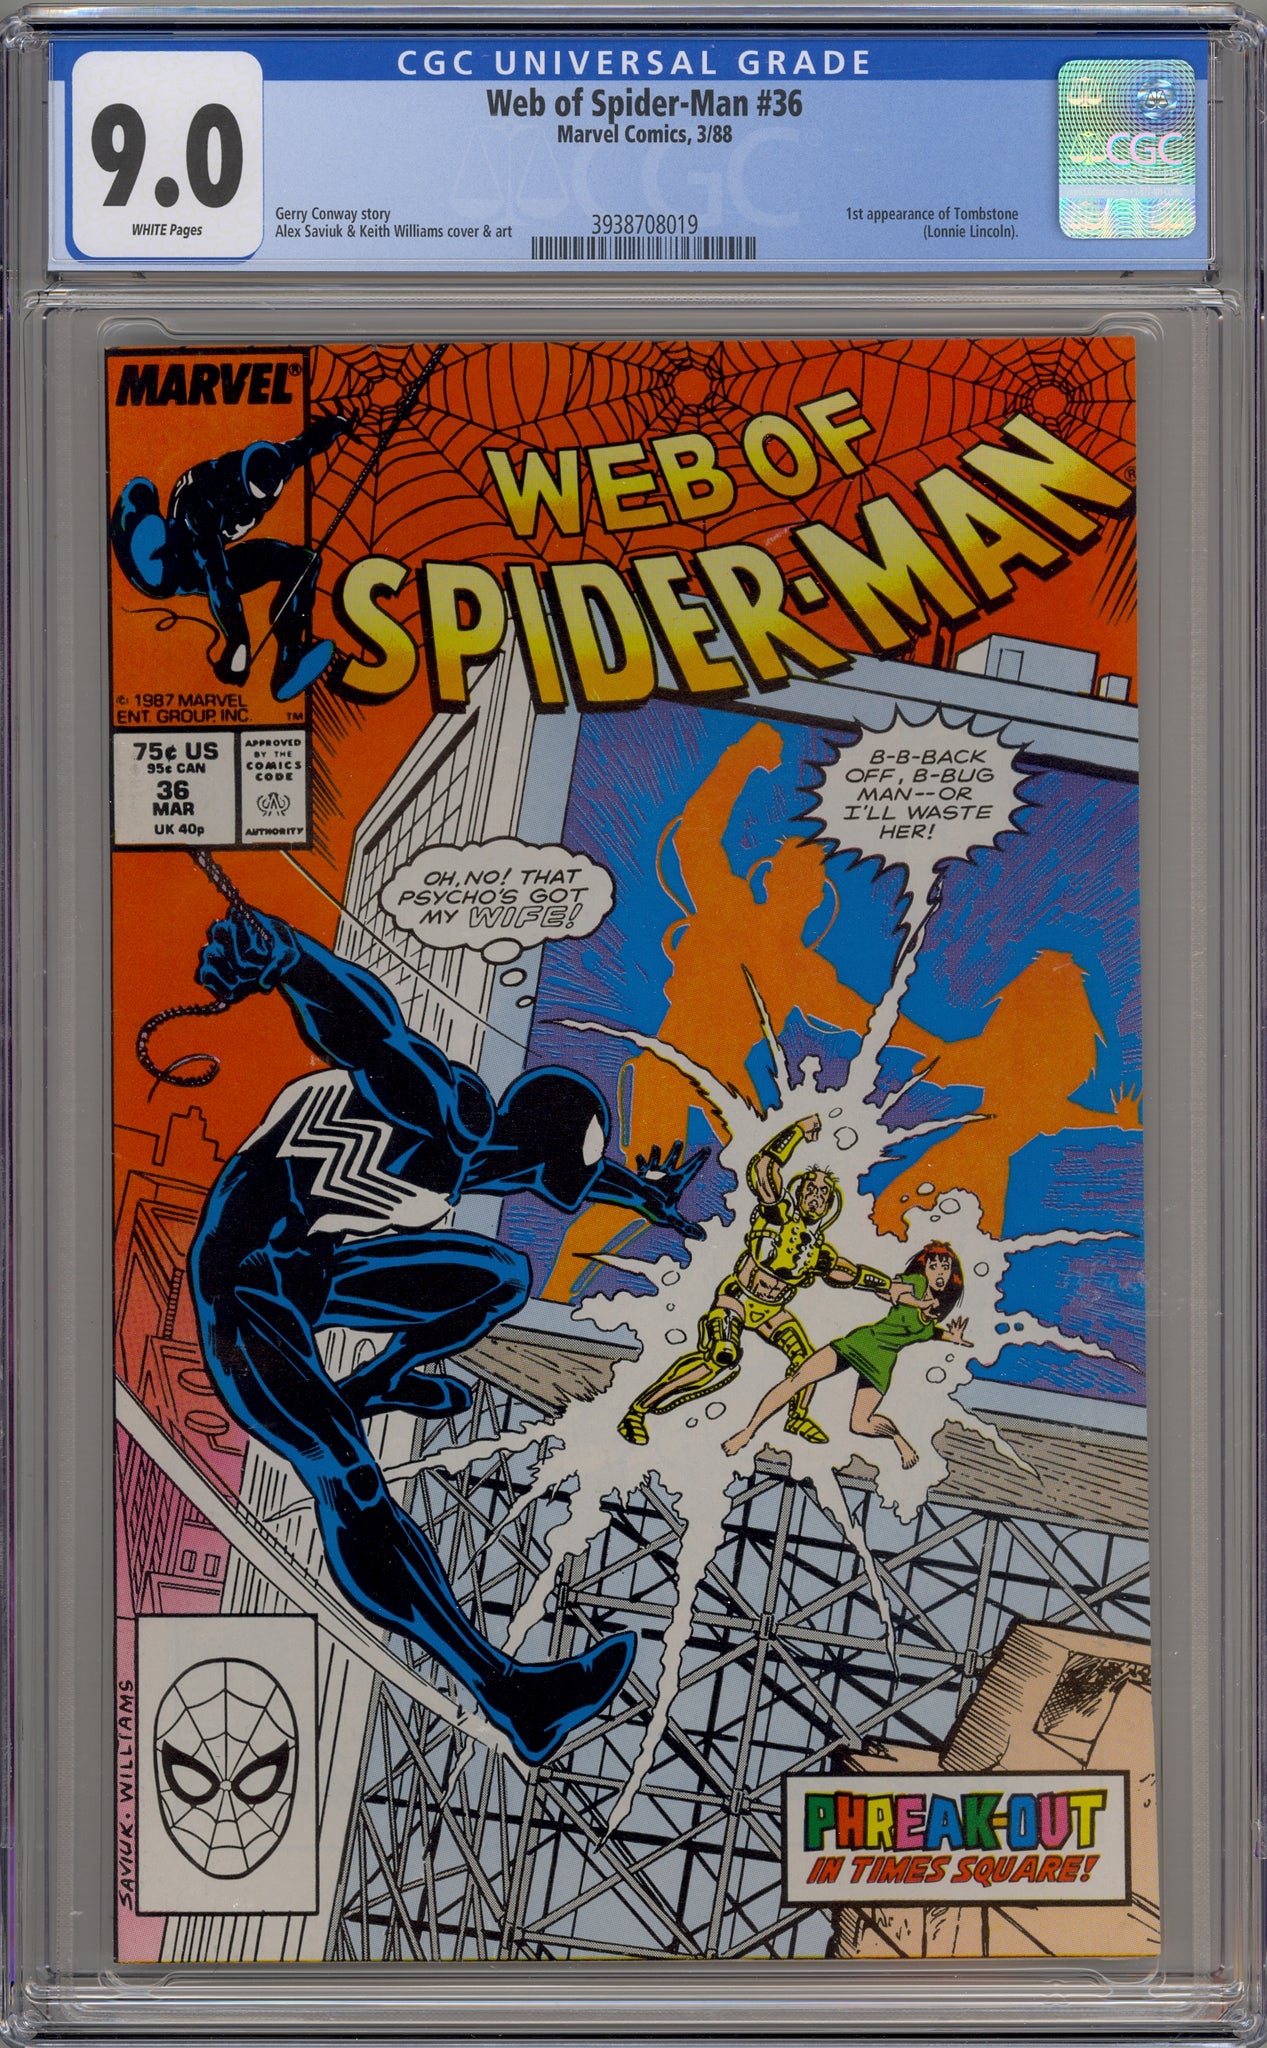 Web of Spider-Man #36 (1988) Tombstone